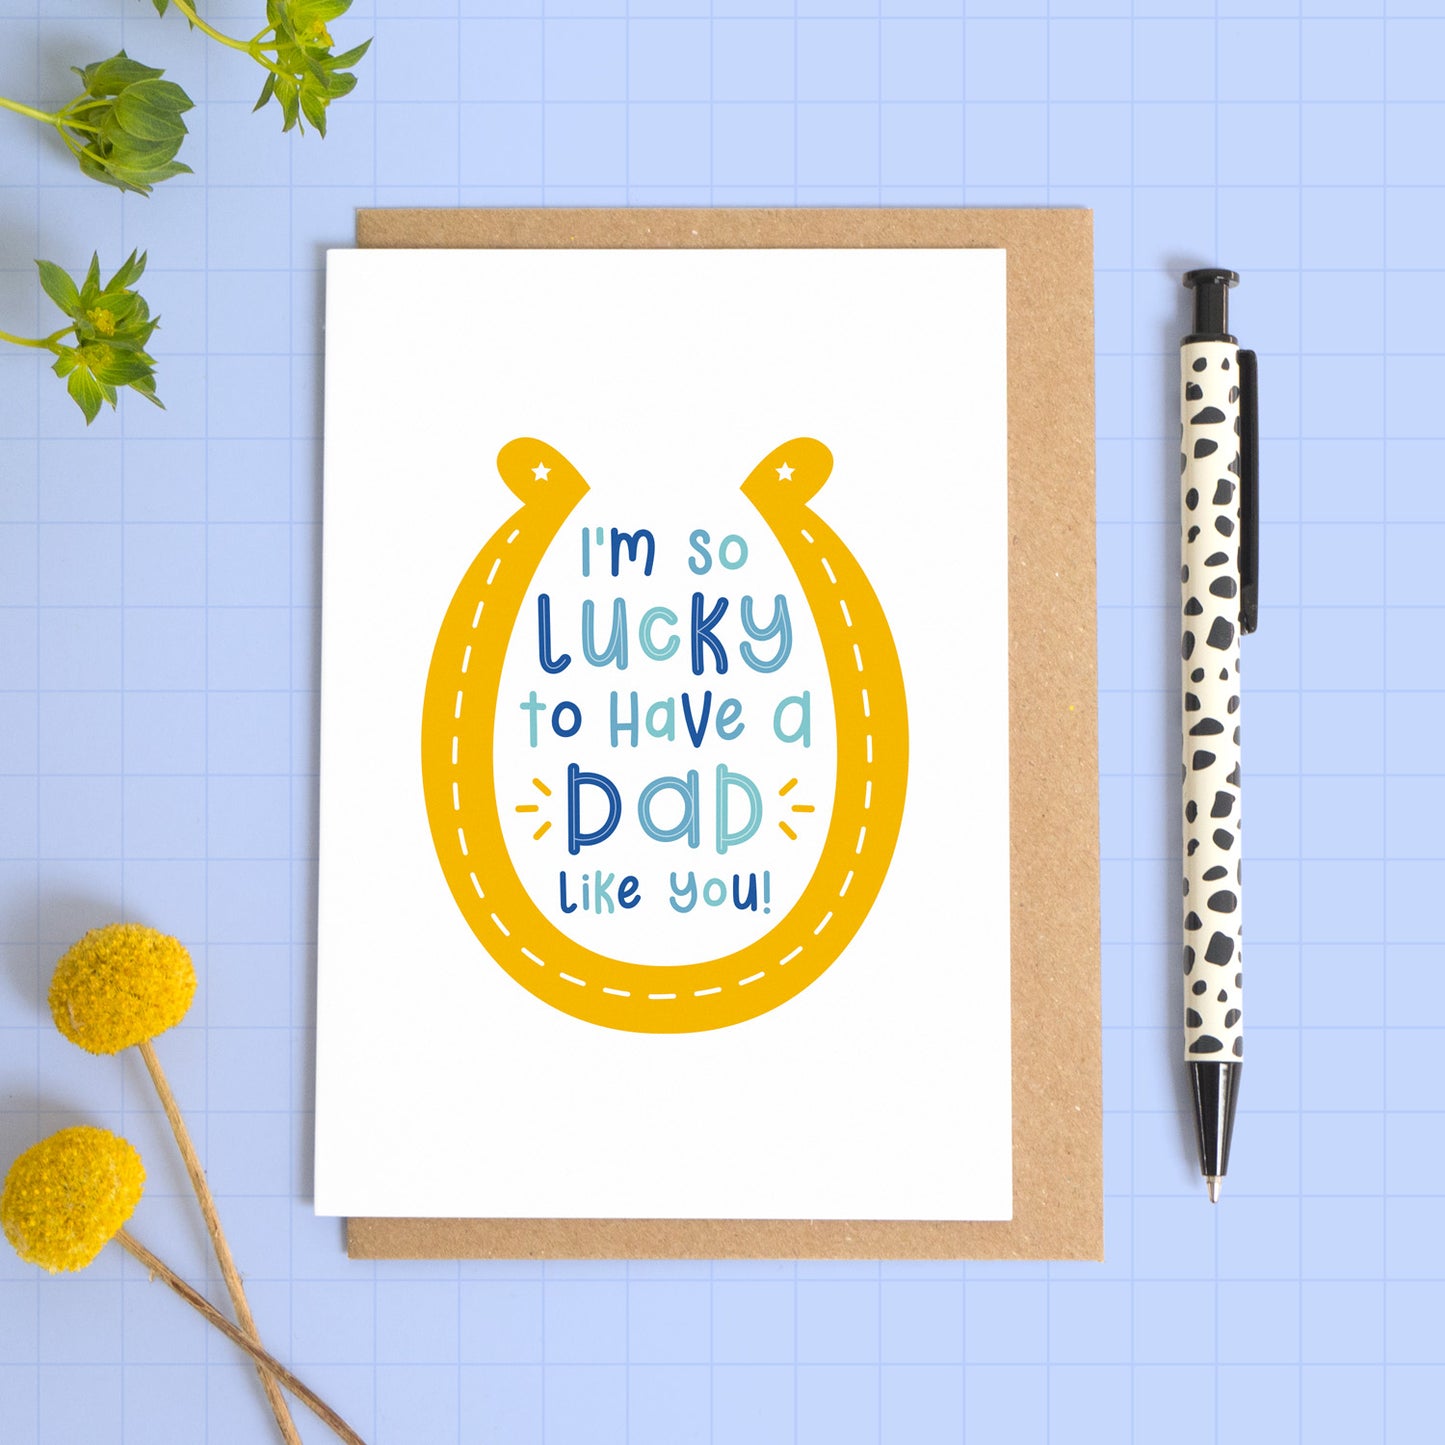 An image showing a card with writing inside of a horseshoe that reads 'I'm so lucky to have a dad like you'. The horseshoe is yellow and the text is in varying tones of blue. The card has been laid on top of a kraft brown envelope and has been photographed on a blue background. There are flowers and a pen for props.